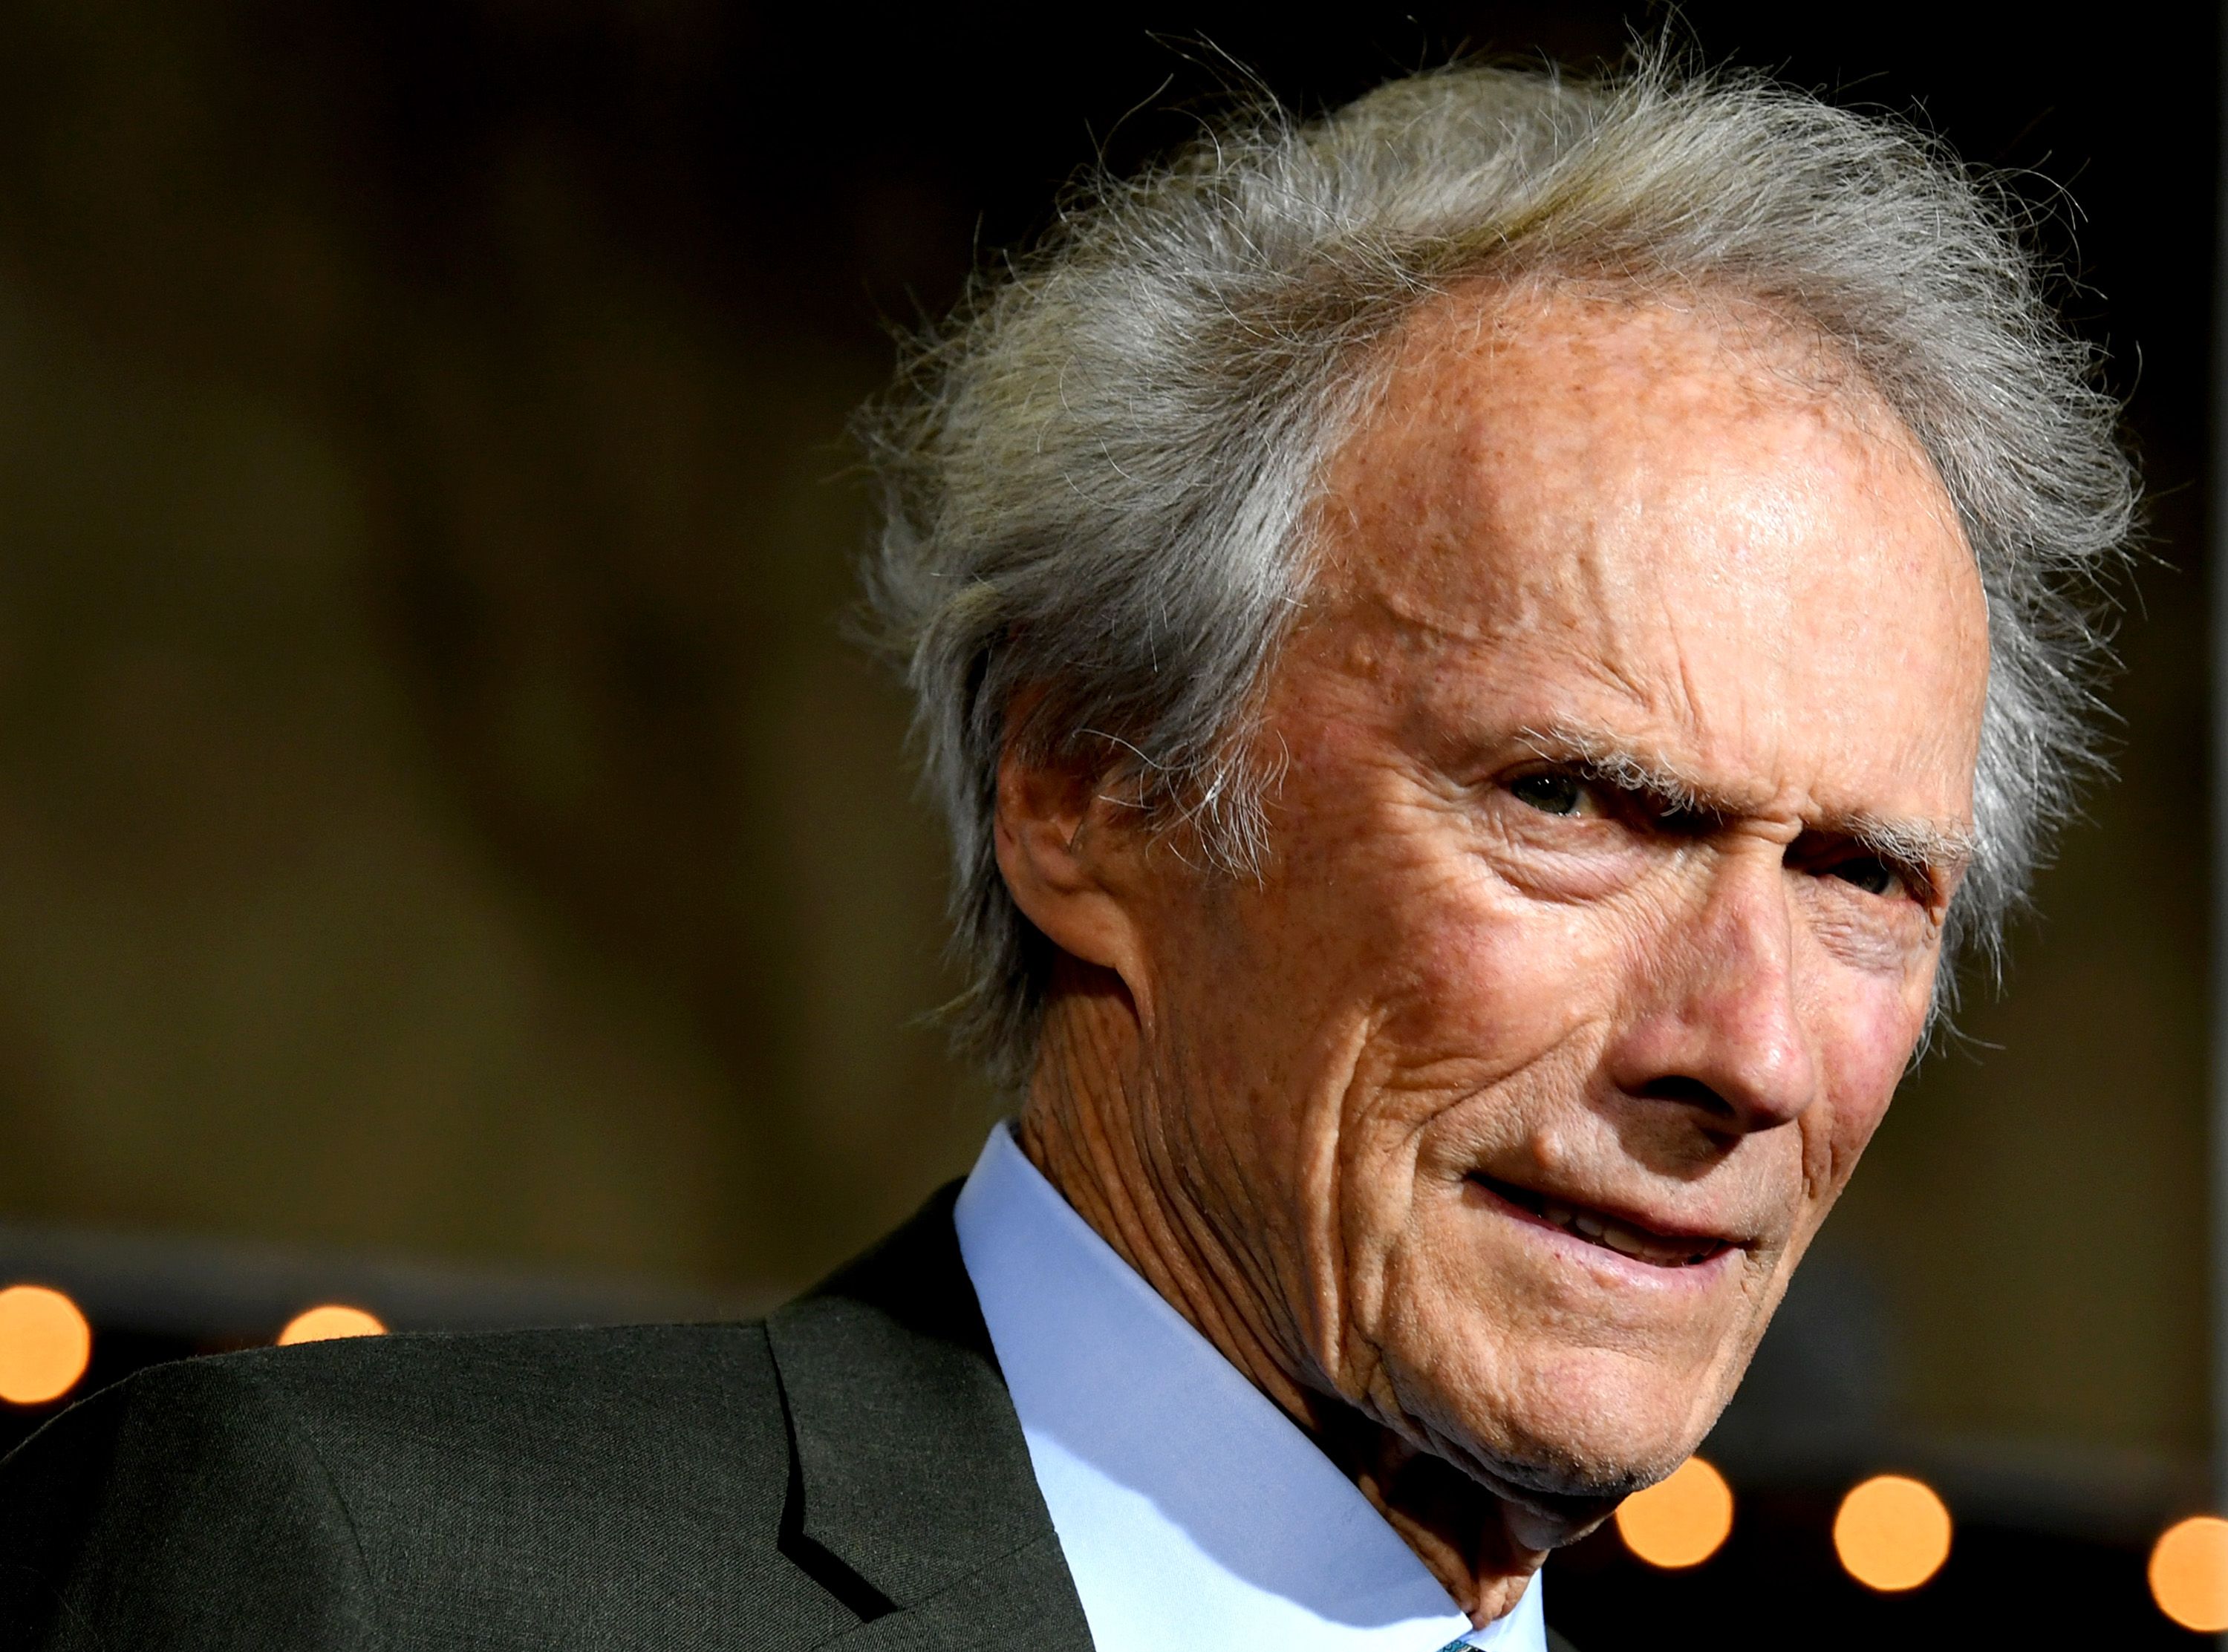 Clint Eastwood — Take a Glimpse at the Iconic Actor's Top Roles, Movies